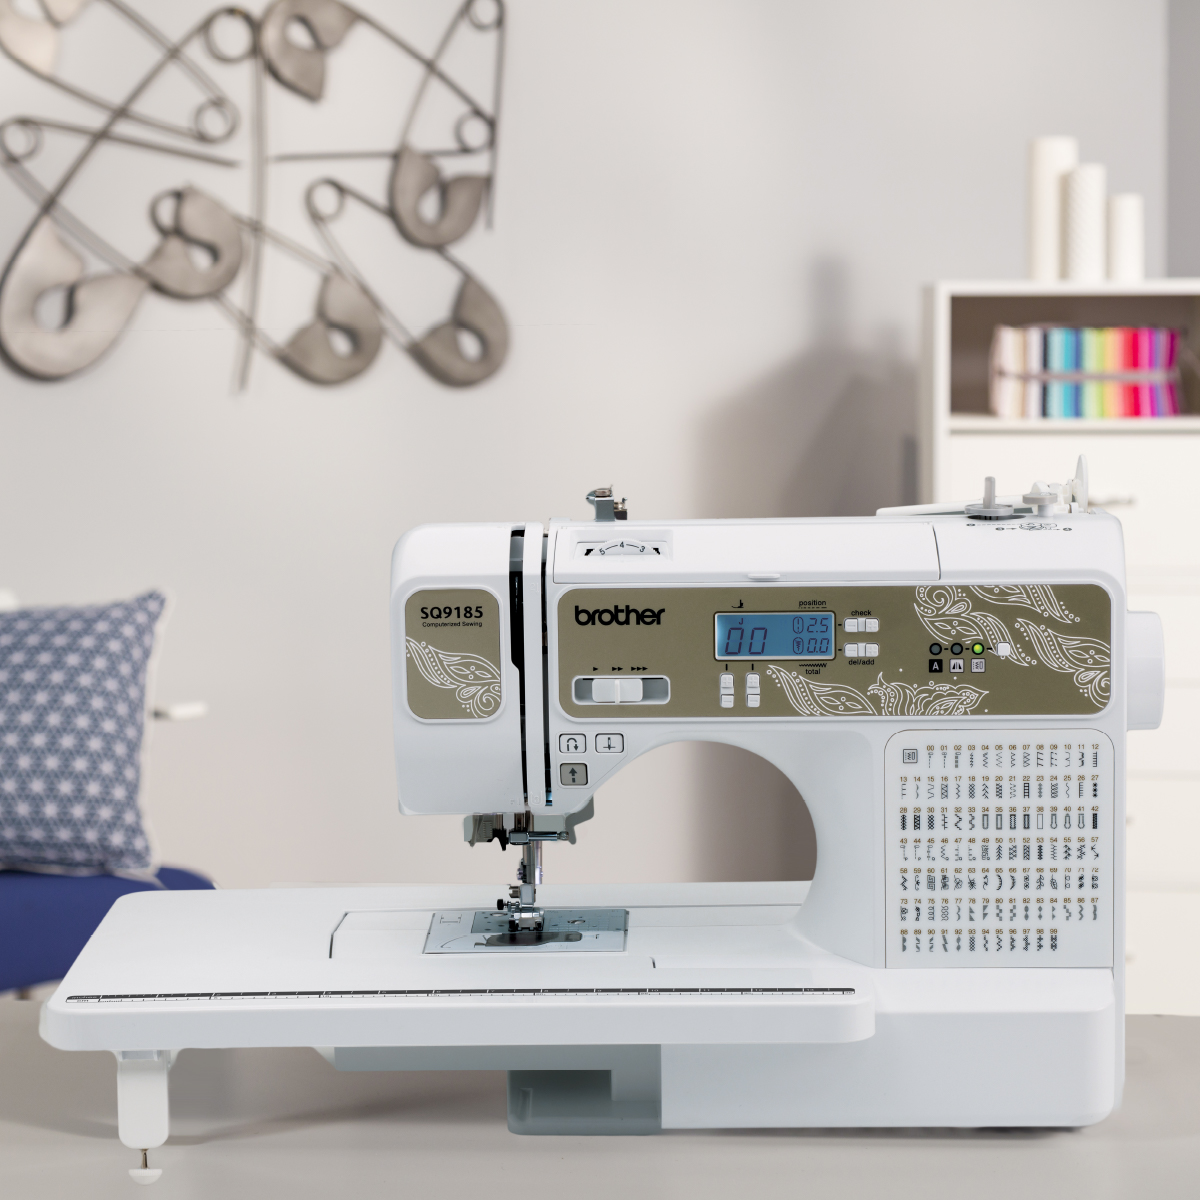 Brother SQ9185 Sewing and Quilting Machine with 130-Stitch - image 4 of 8